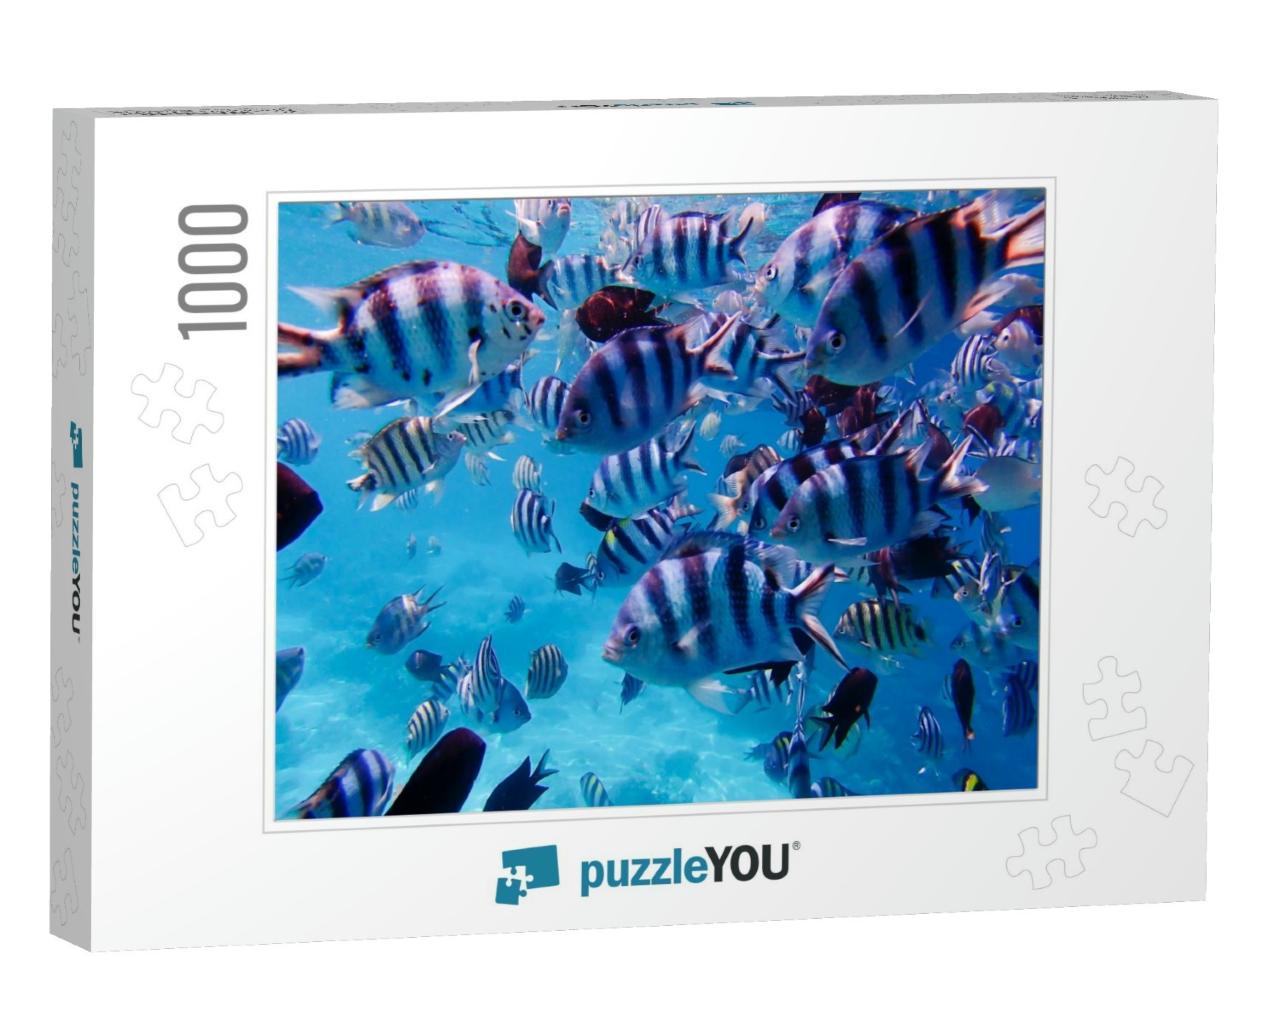 A Group of Colorful Tropical Fish Under the Water. a Colo... Jigsaw Puzzle with 1000 pieces